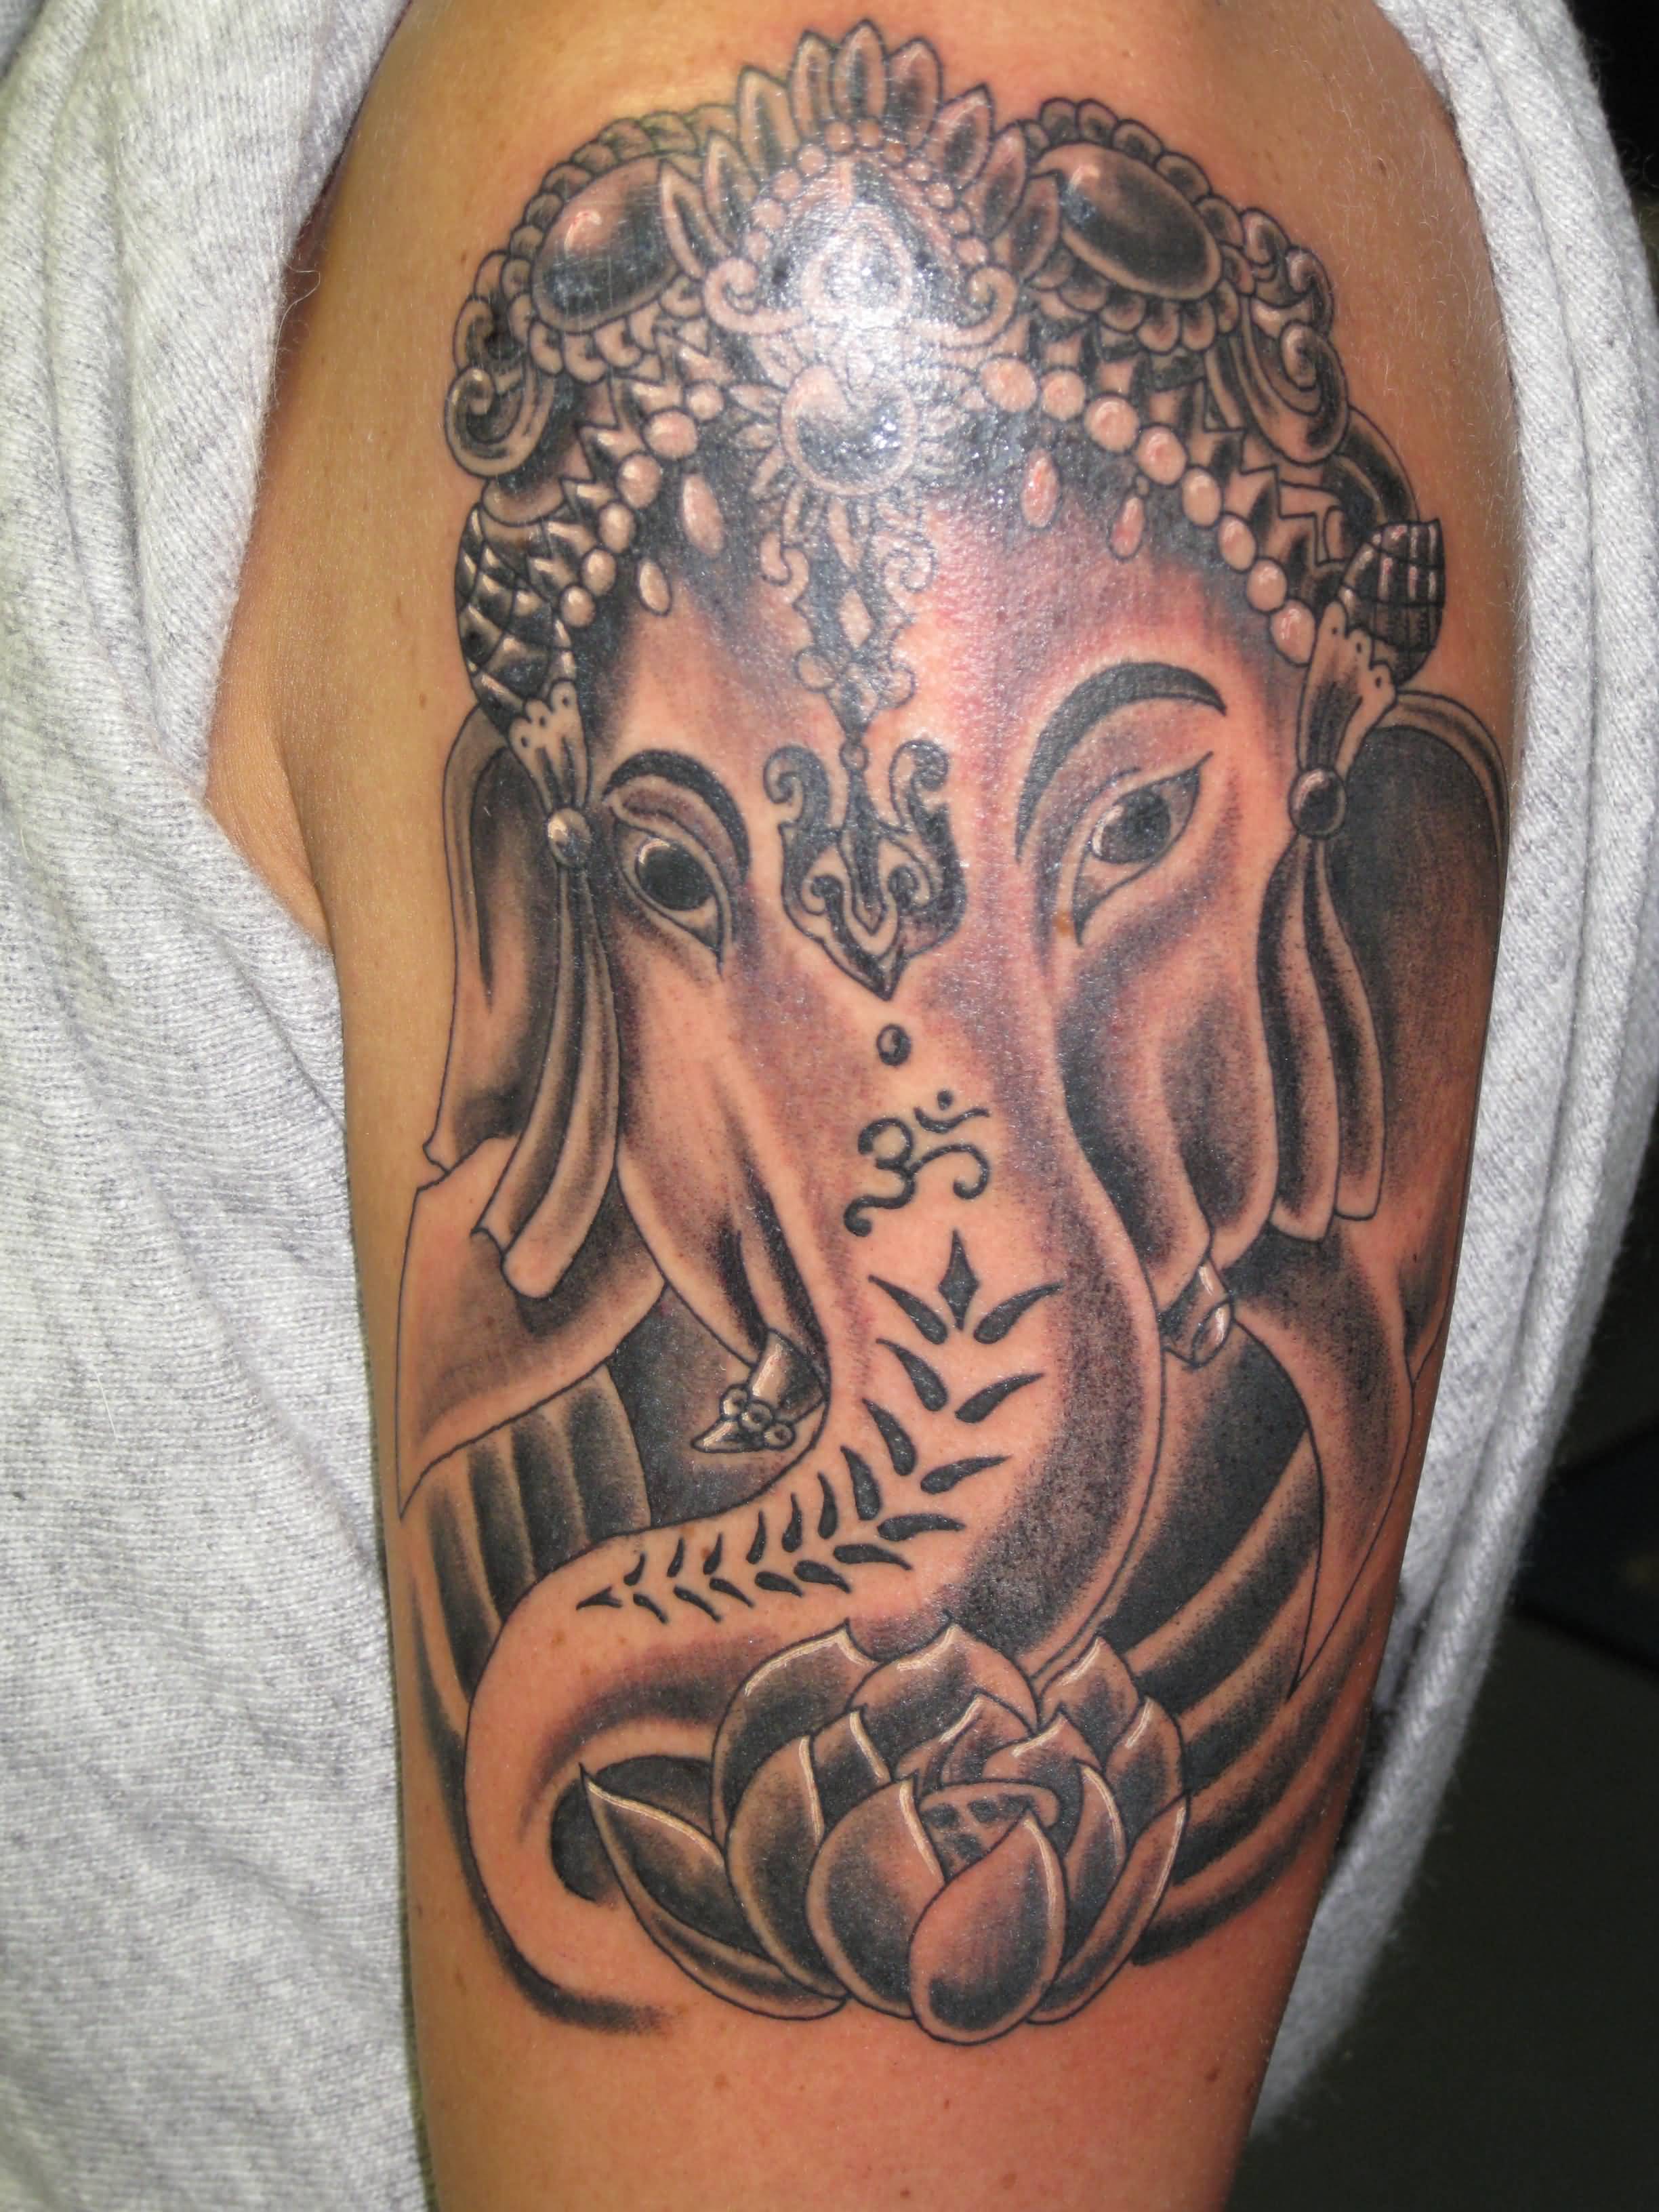 Black Ink Crown On Elephant Head With Flower Tattoo Design For Sleeve